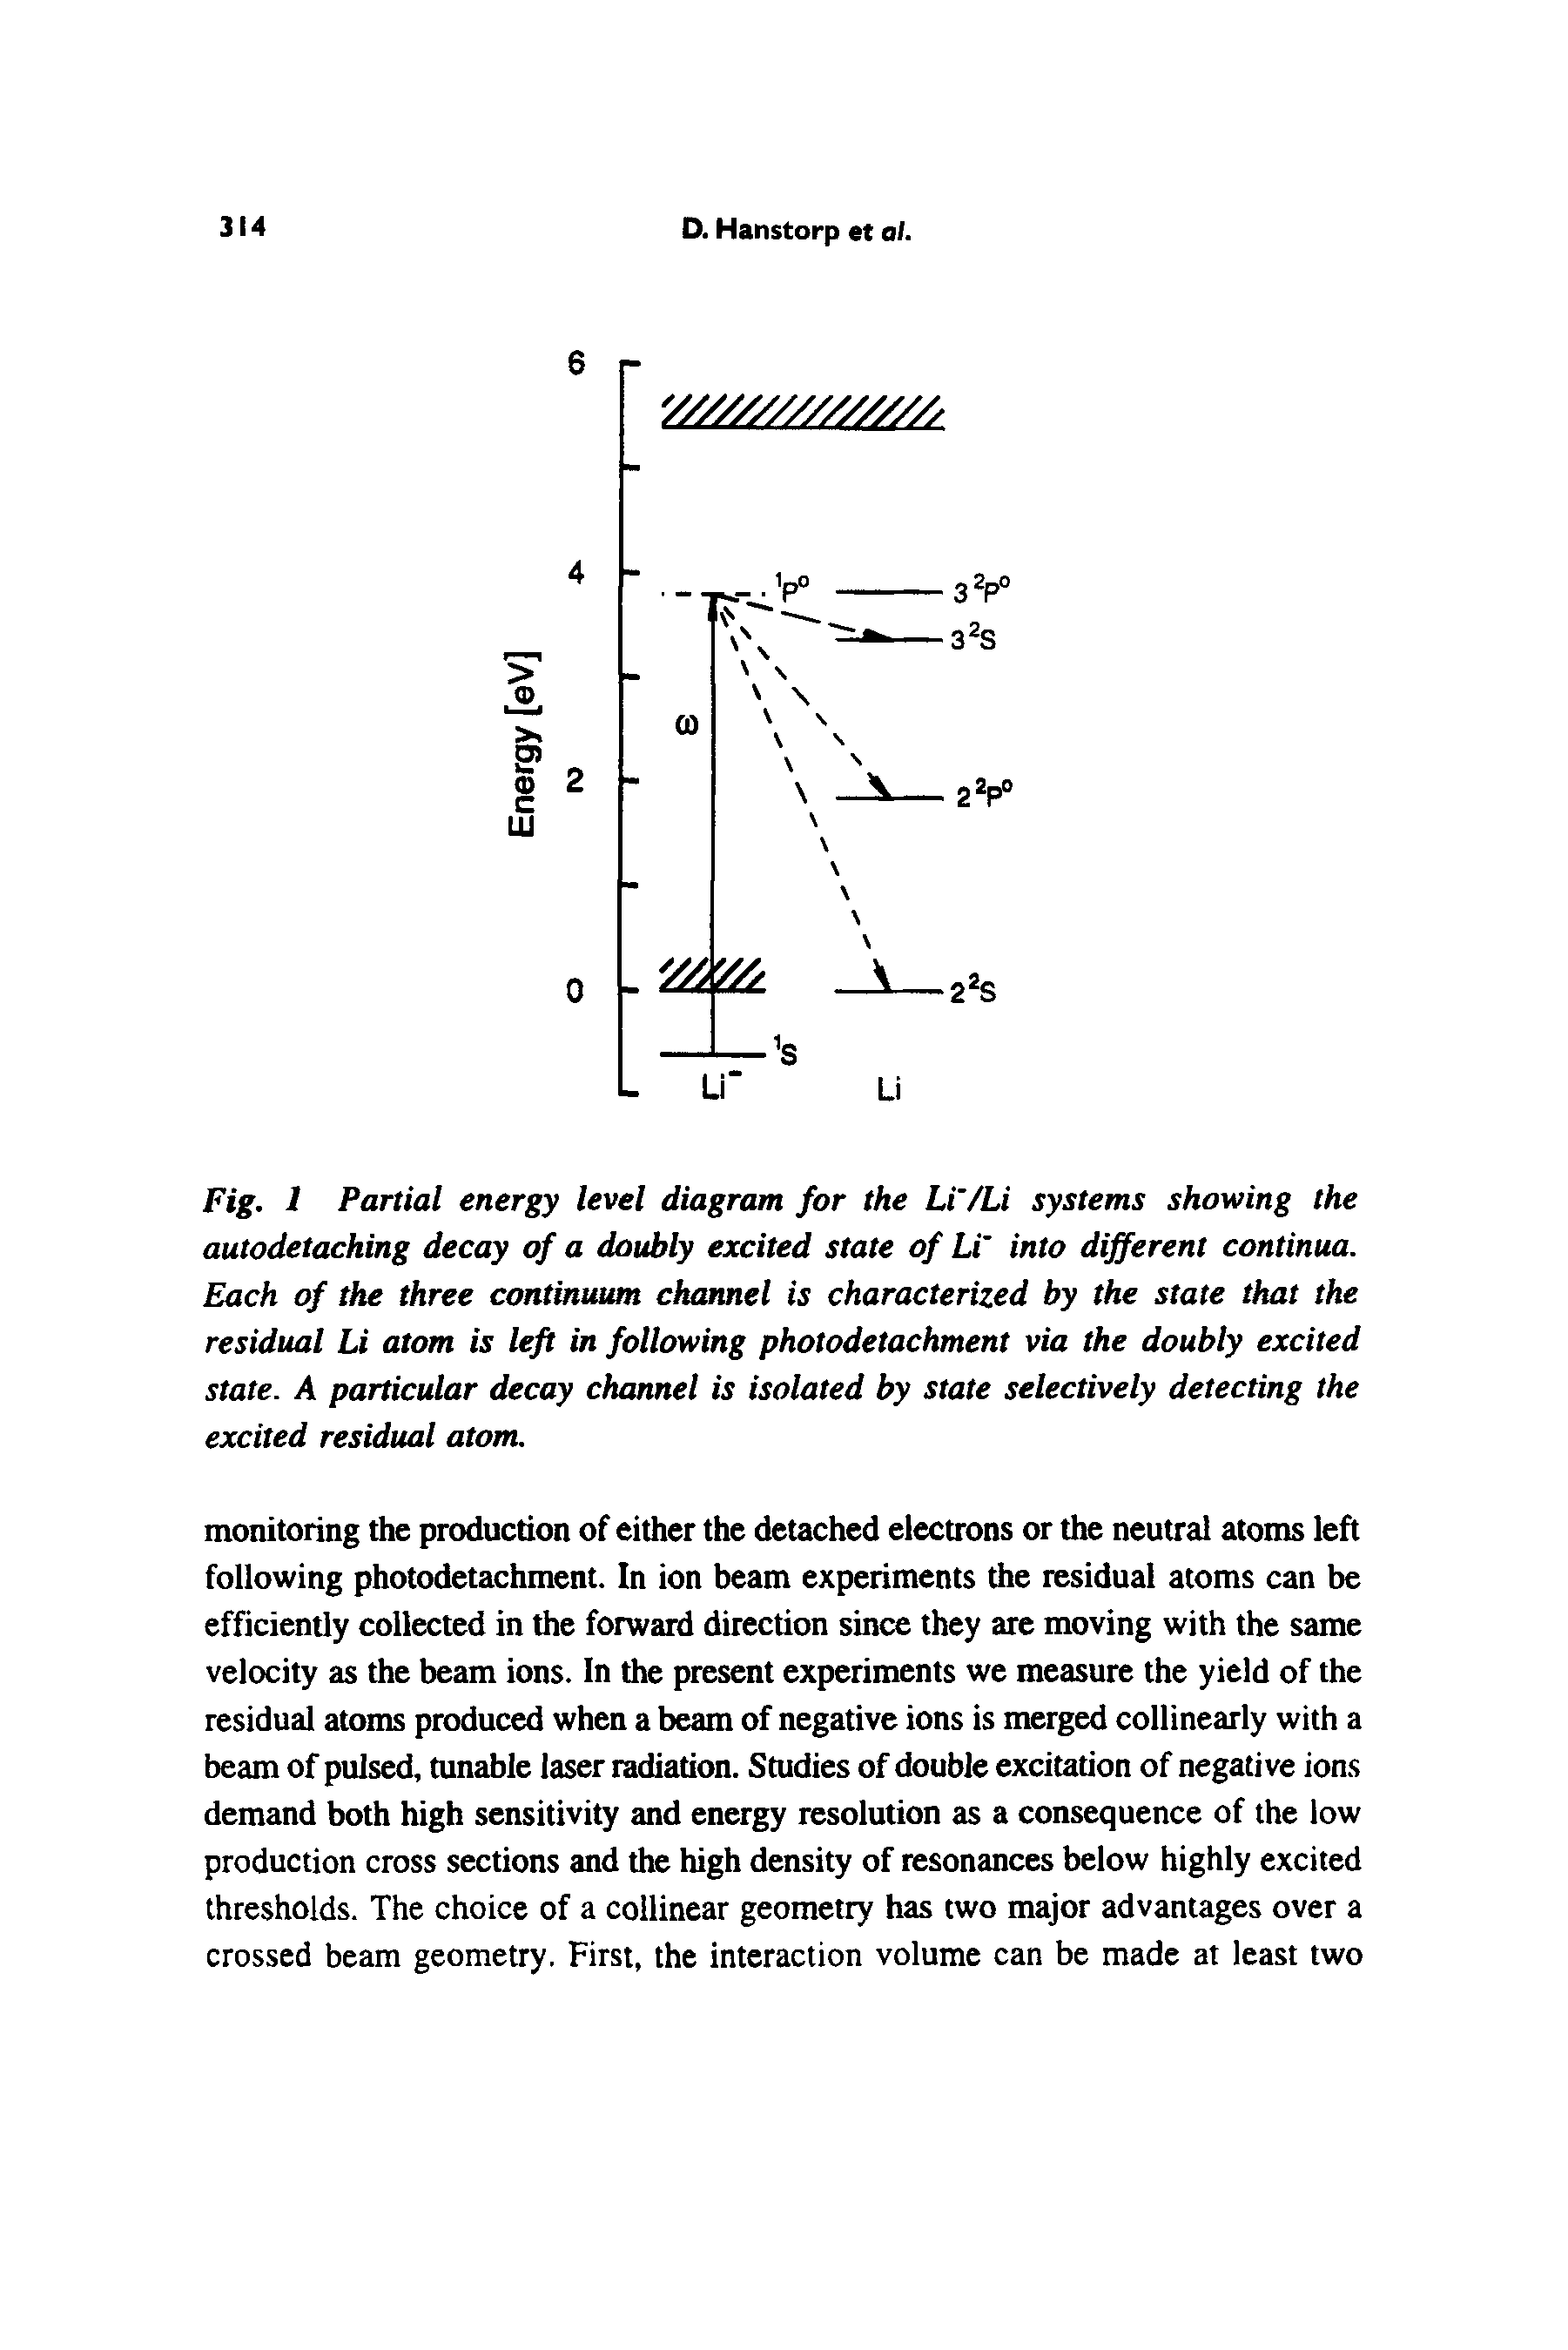 Fig. 1 Partial energy level diagram for the Li /Li systems showing the autodetaching decay of a doubly excited state of Li into different continua. Each of the three continuum channel is characterized by the state that the residual Li atom is left in following photodetachment via the doubly excited state. A particular decay channel is isolated by state selectively detecting the excited residual atom.